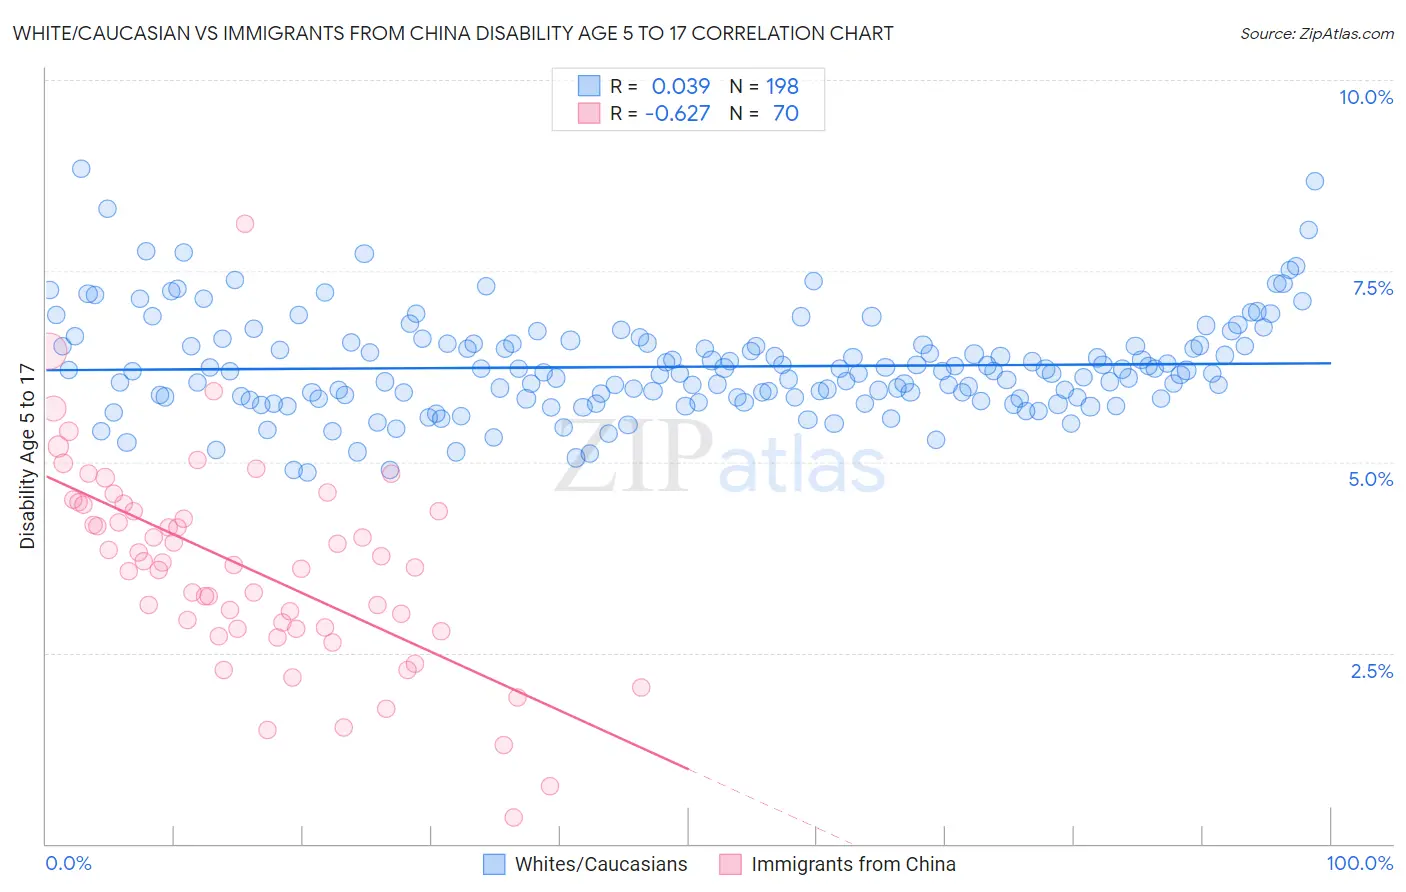 White/Caucasian vs Immigrants from China Disability Age 5 to 17